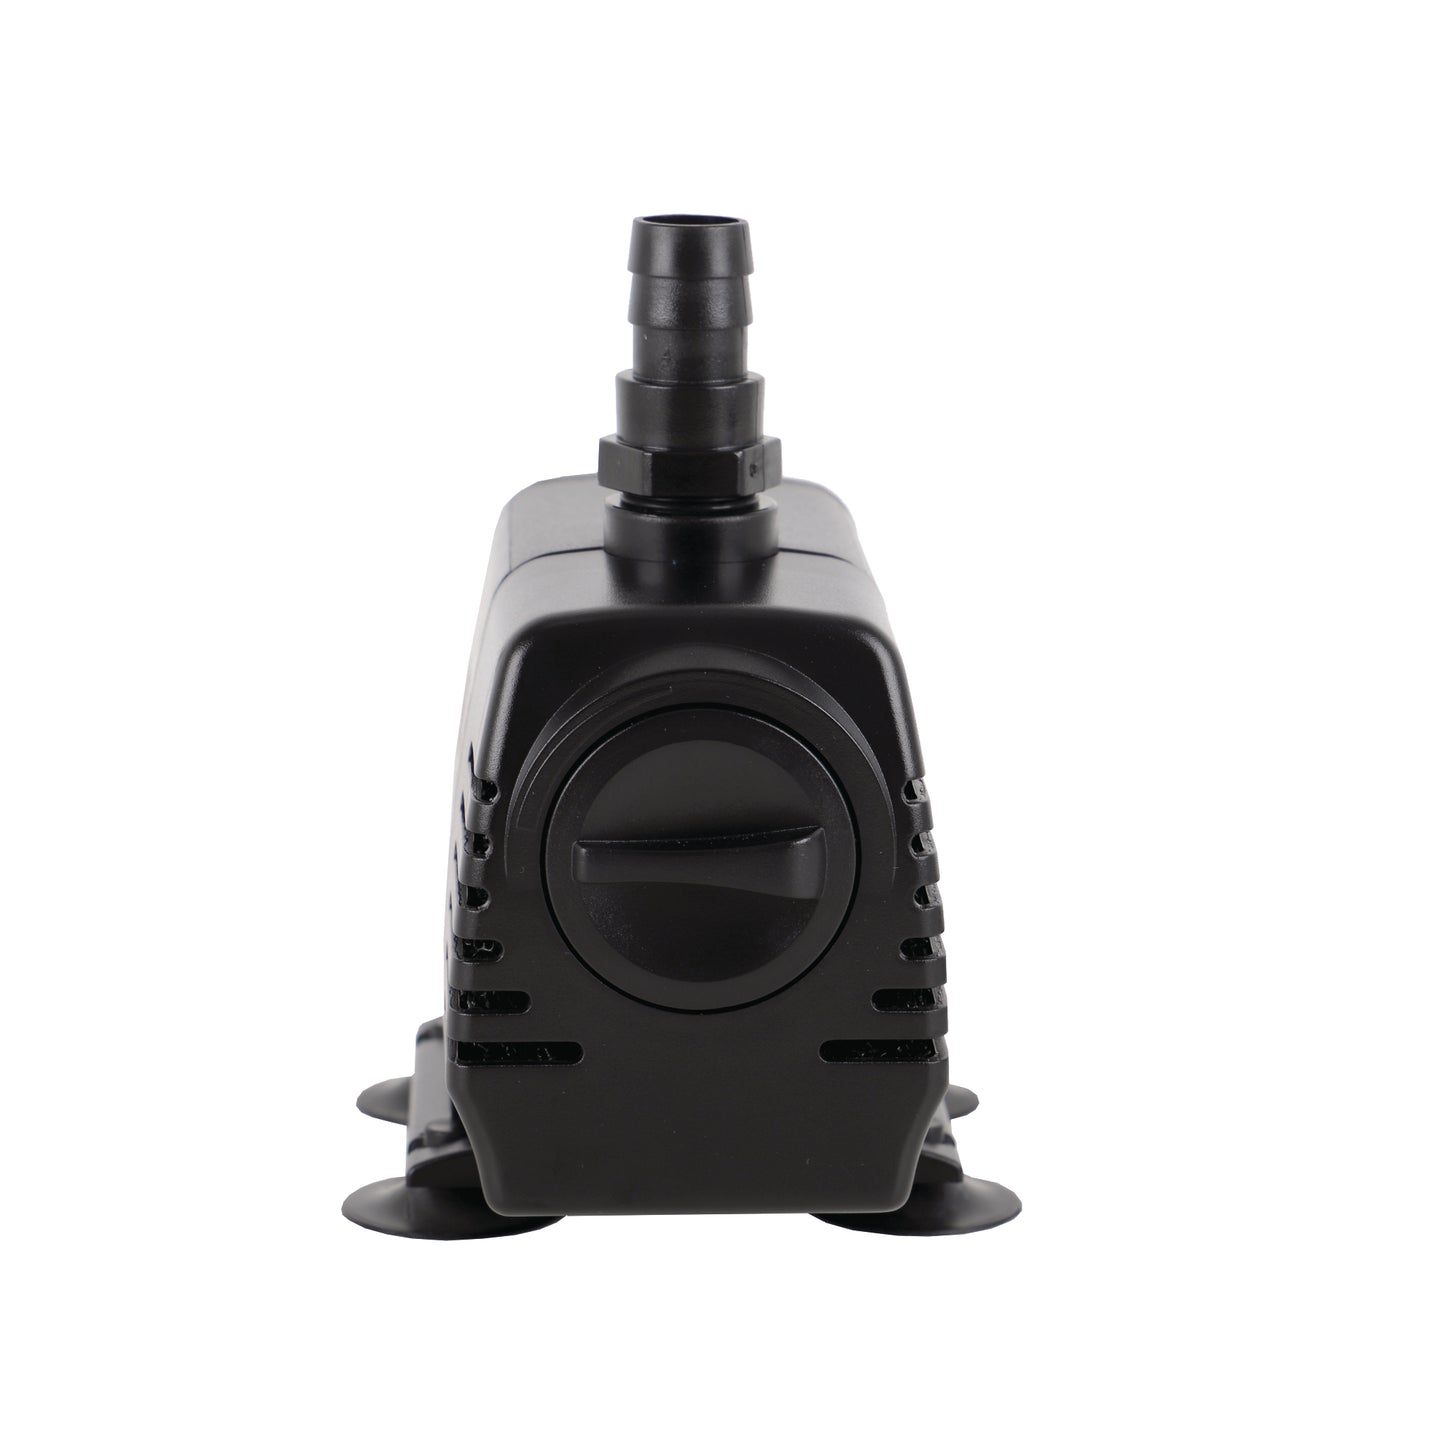 Waterfall Pumps - Pond or Fountain Submersible - Water Pump - 2400L/h - 10m